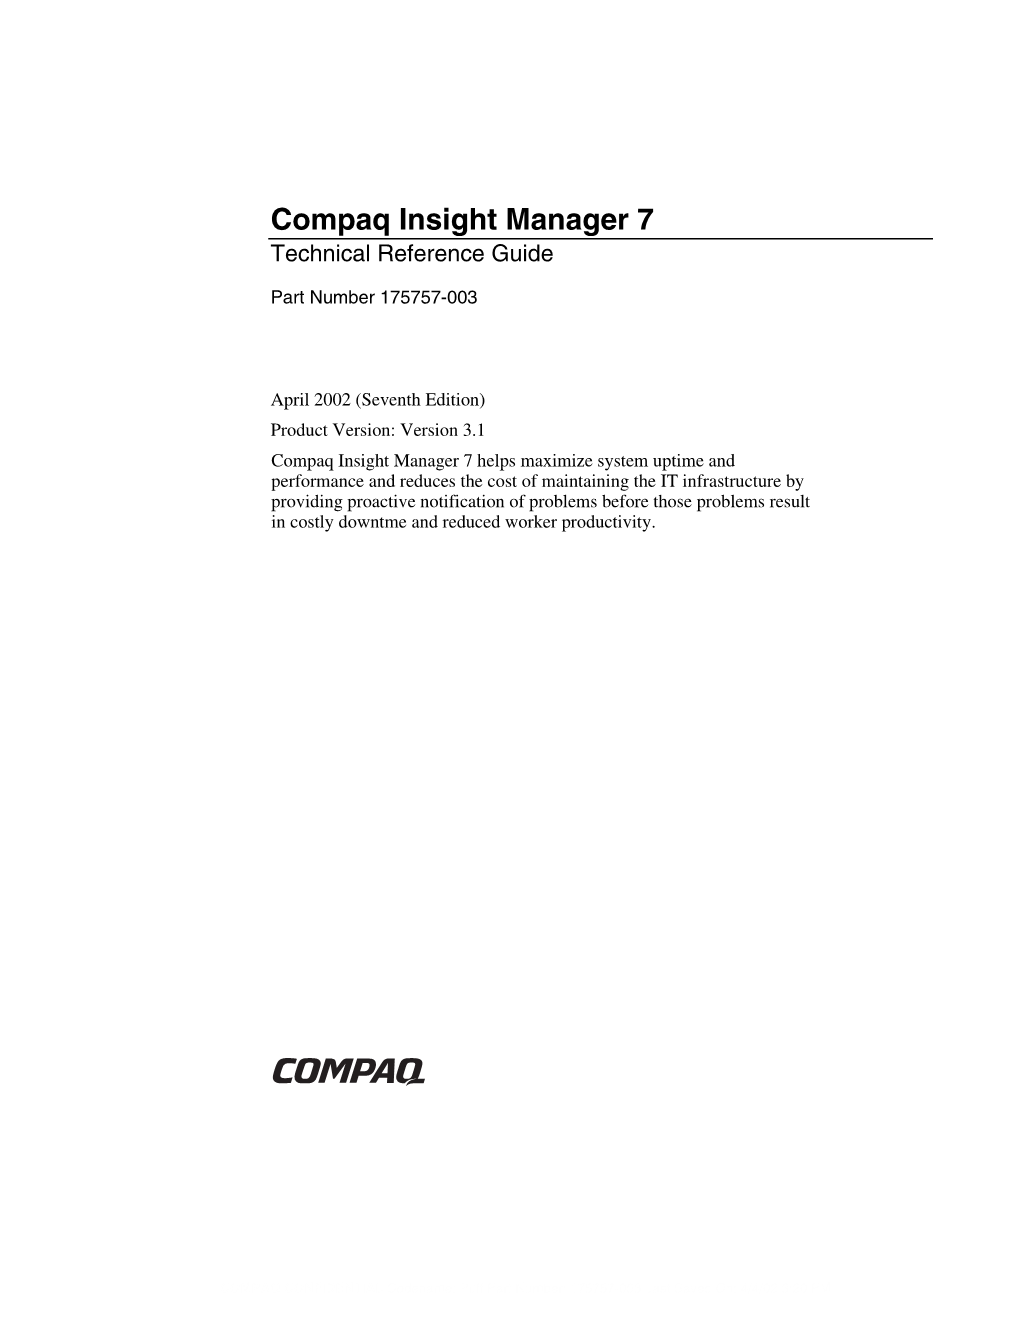 Compaq Insight Manager 7 Technical Reference Guide